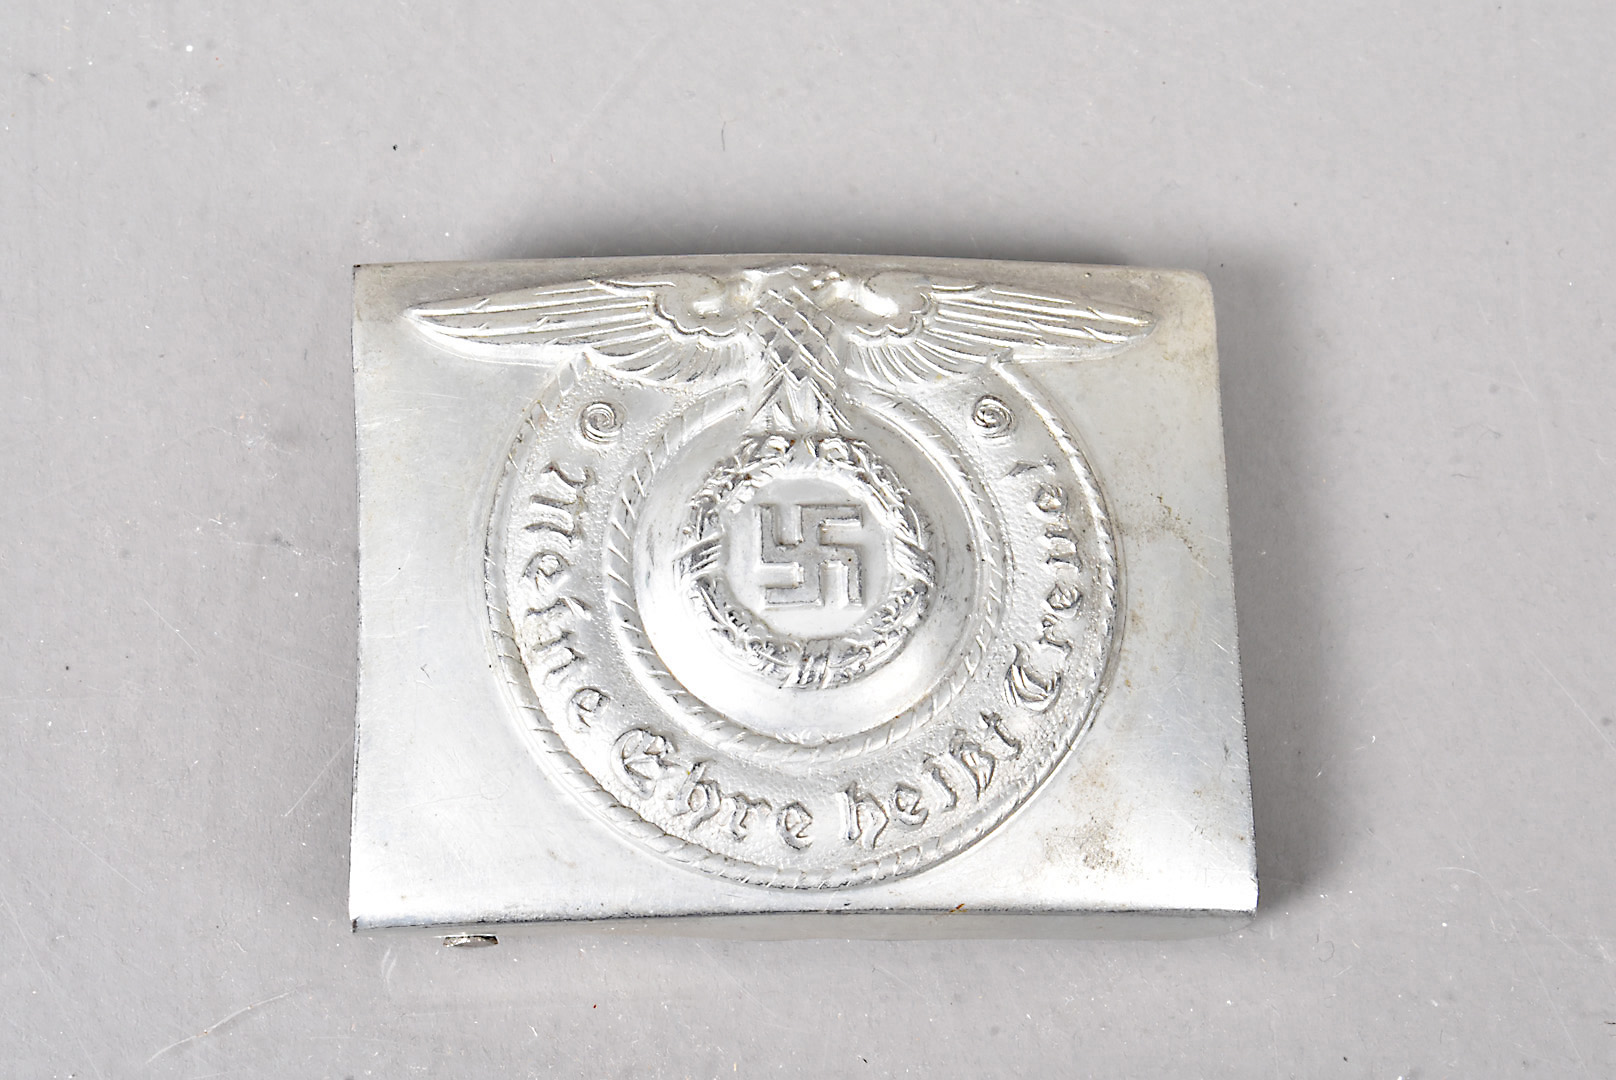 A WWII German SS Belt Buckle, the white metal buckle with eagle and swastika to the front, stamped